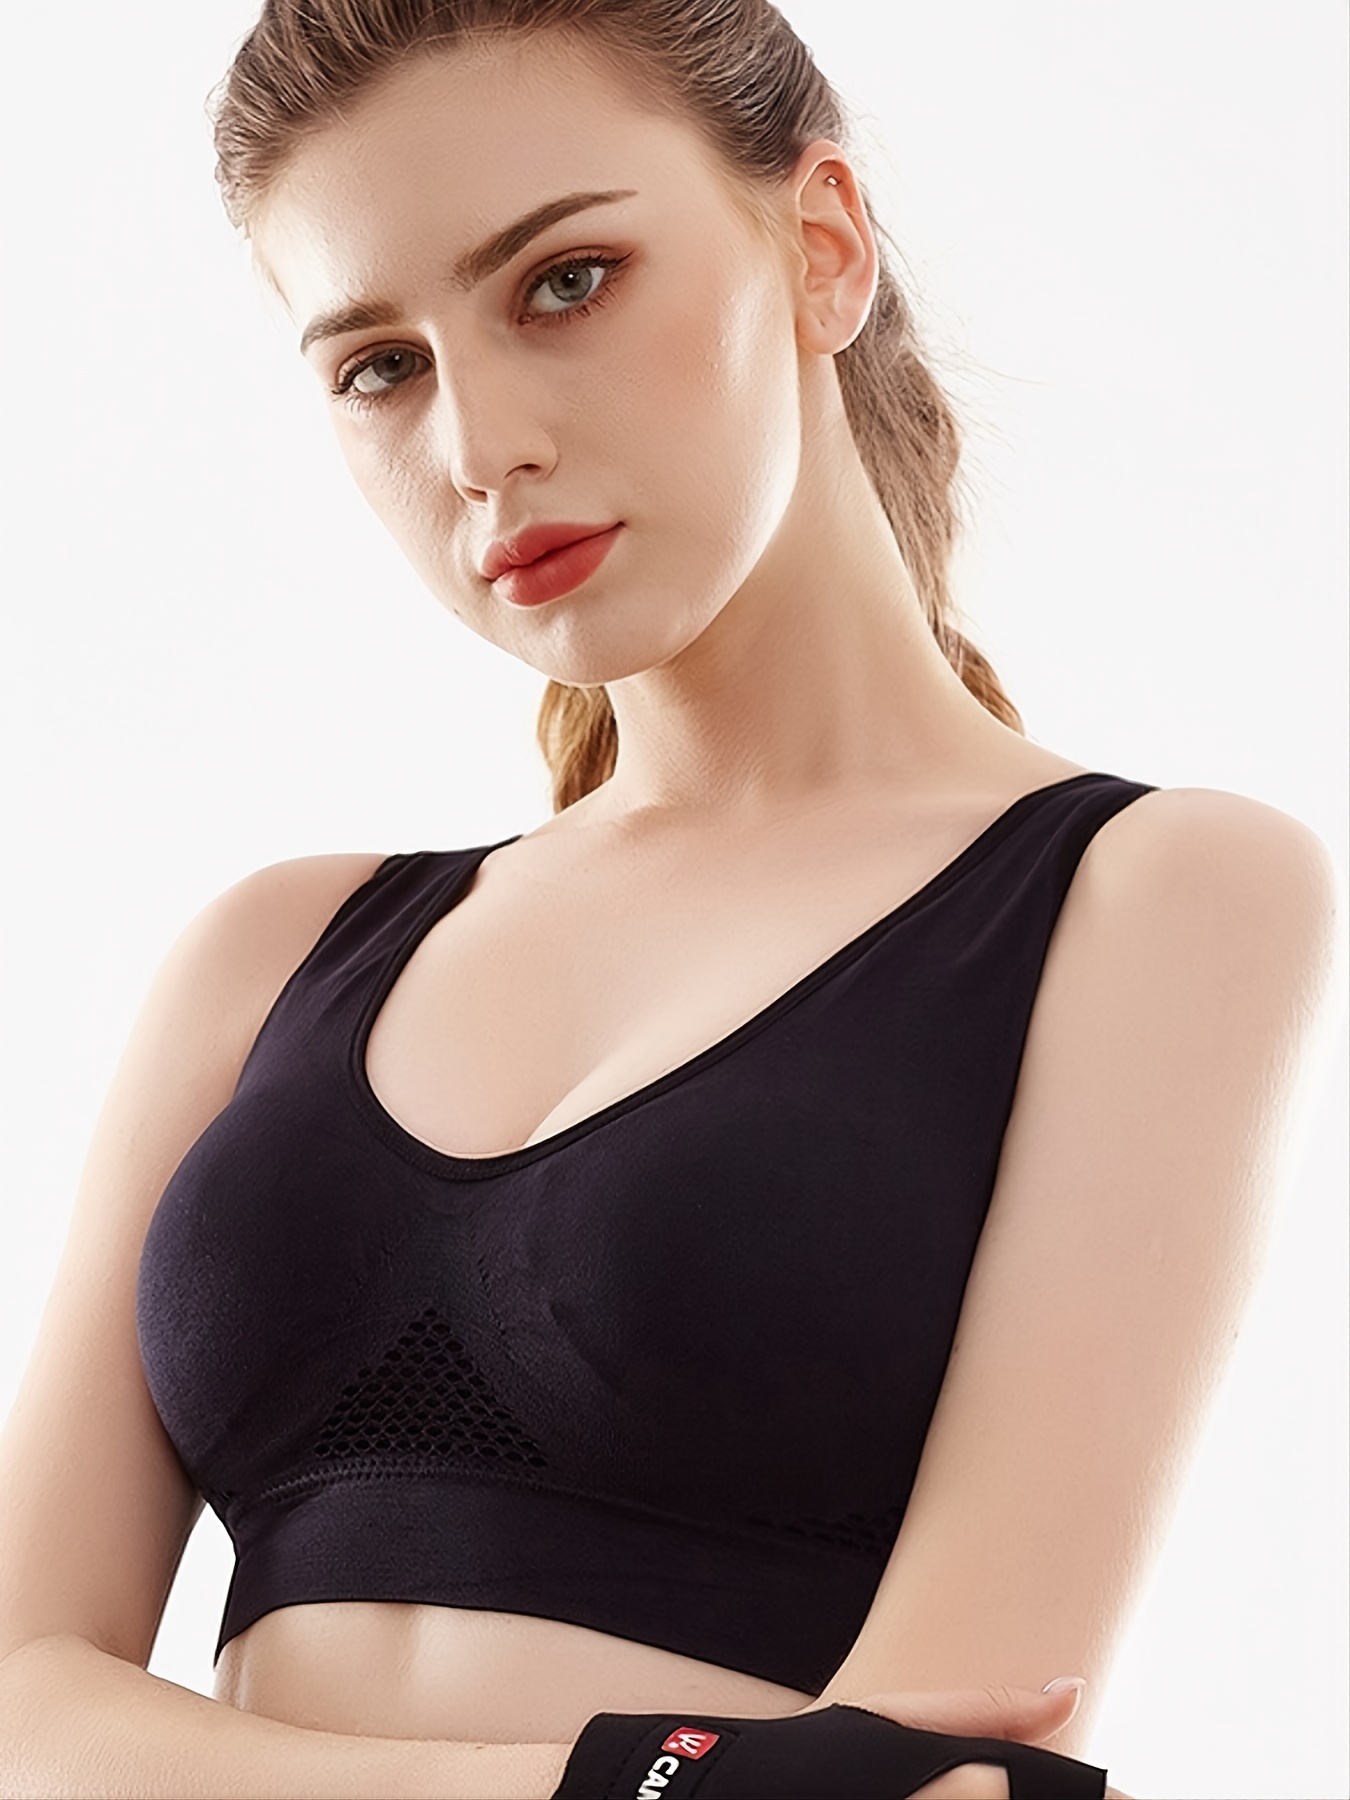 Haitryli Womens Mesh Sheer Sport Bra Hollow Out Underboob Crop Top Workout  Yoga Camisole Halter Neck Dancewear Black Small at  Women's Clothing  store